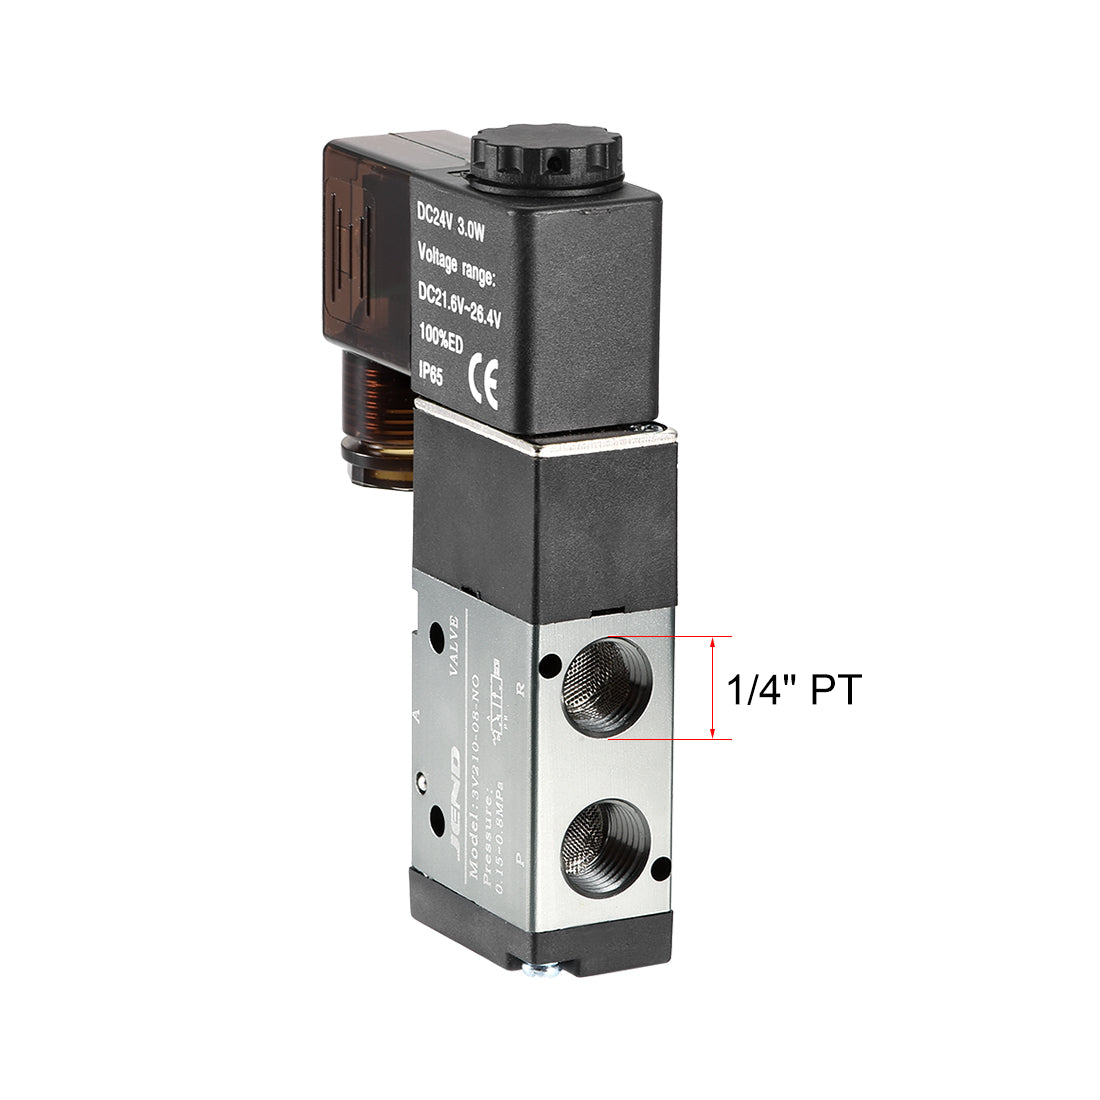 uxcell Uxcell 3V210-08 Pneumatic Air NO Single Piloted  Electrical Control Solenoid Valve DC 24V 3 Way 2 Position 1/4" PT Thread Internally Acting Type